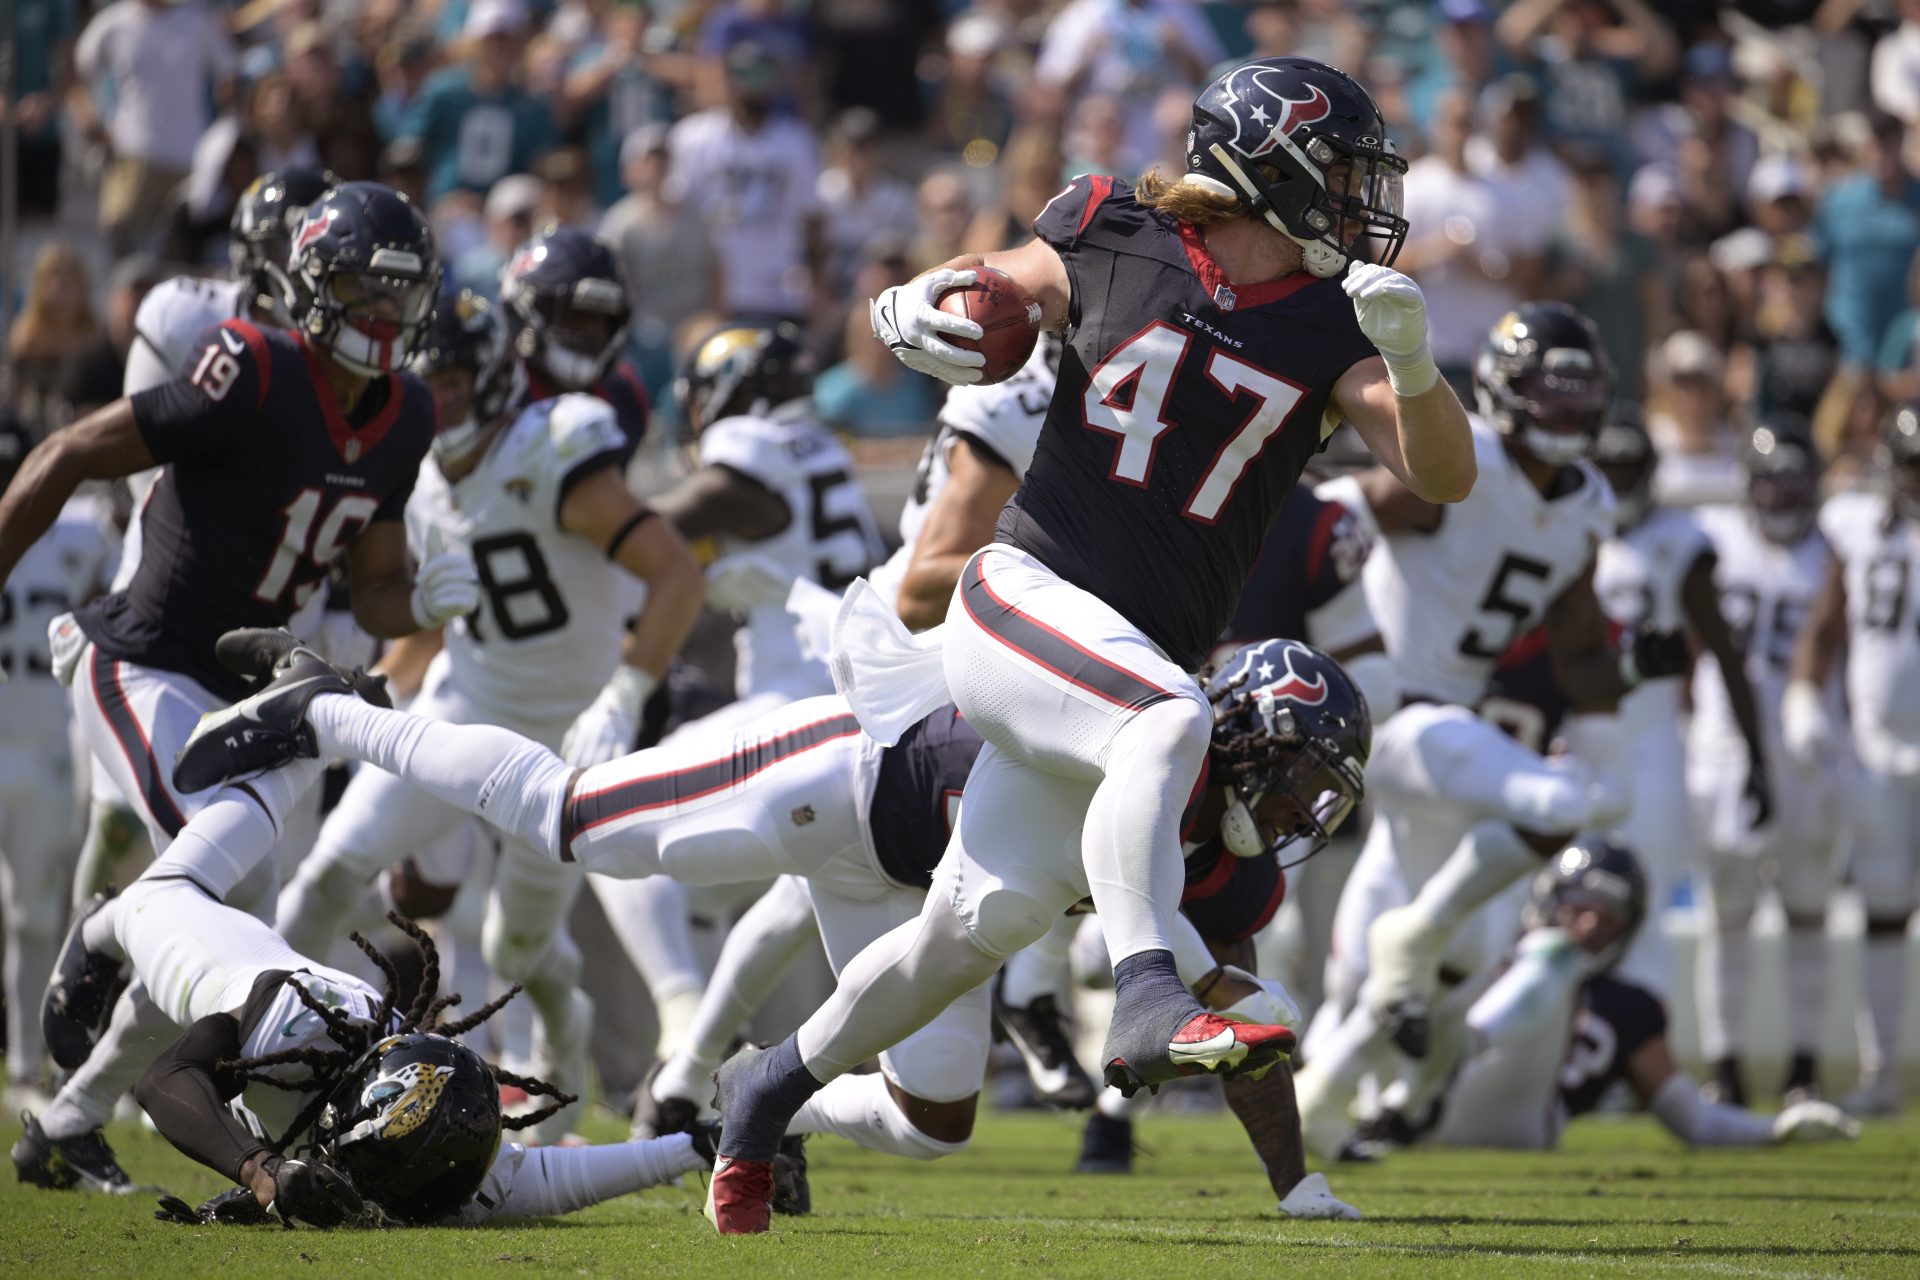 Beck's rare TD return propels Texans to a 37-17 rout of Jaguars and gives  Ryans his first win